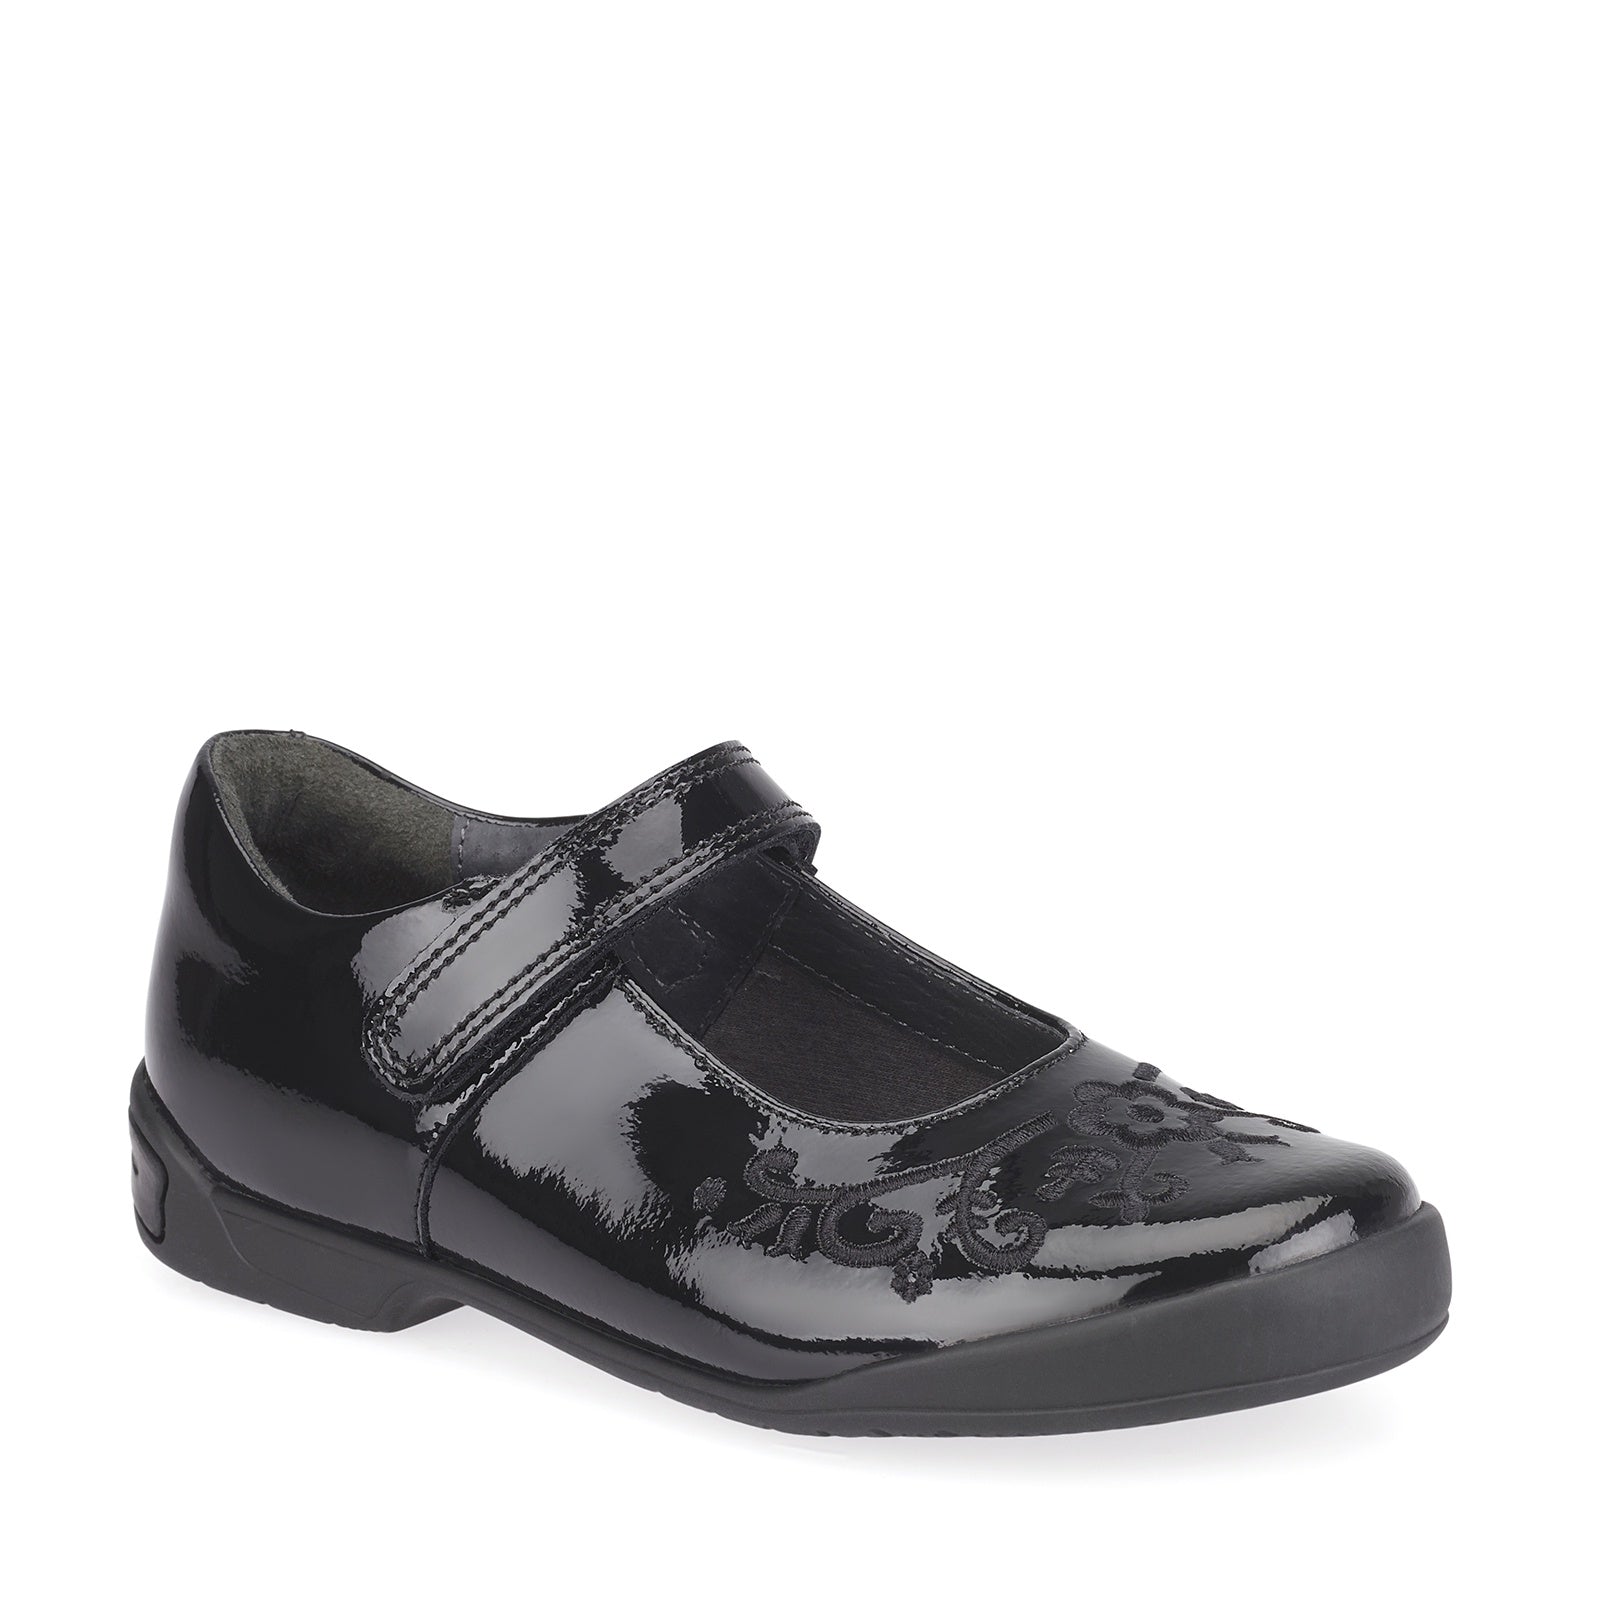 Start-Rite Hopscotch 2788-3 Black Patent Girls Leather Mary Jane Shoe - elevate your sole